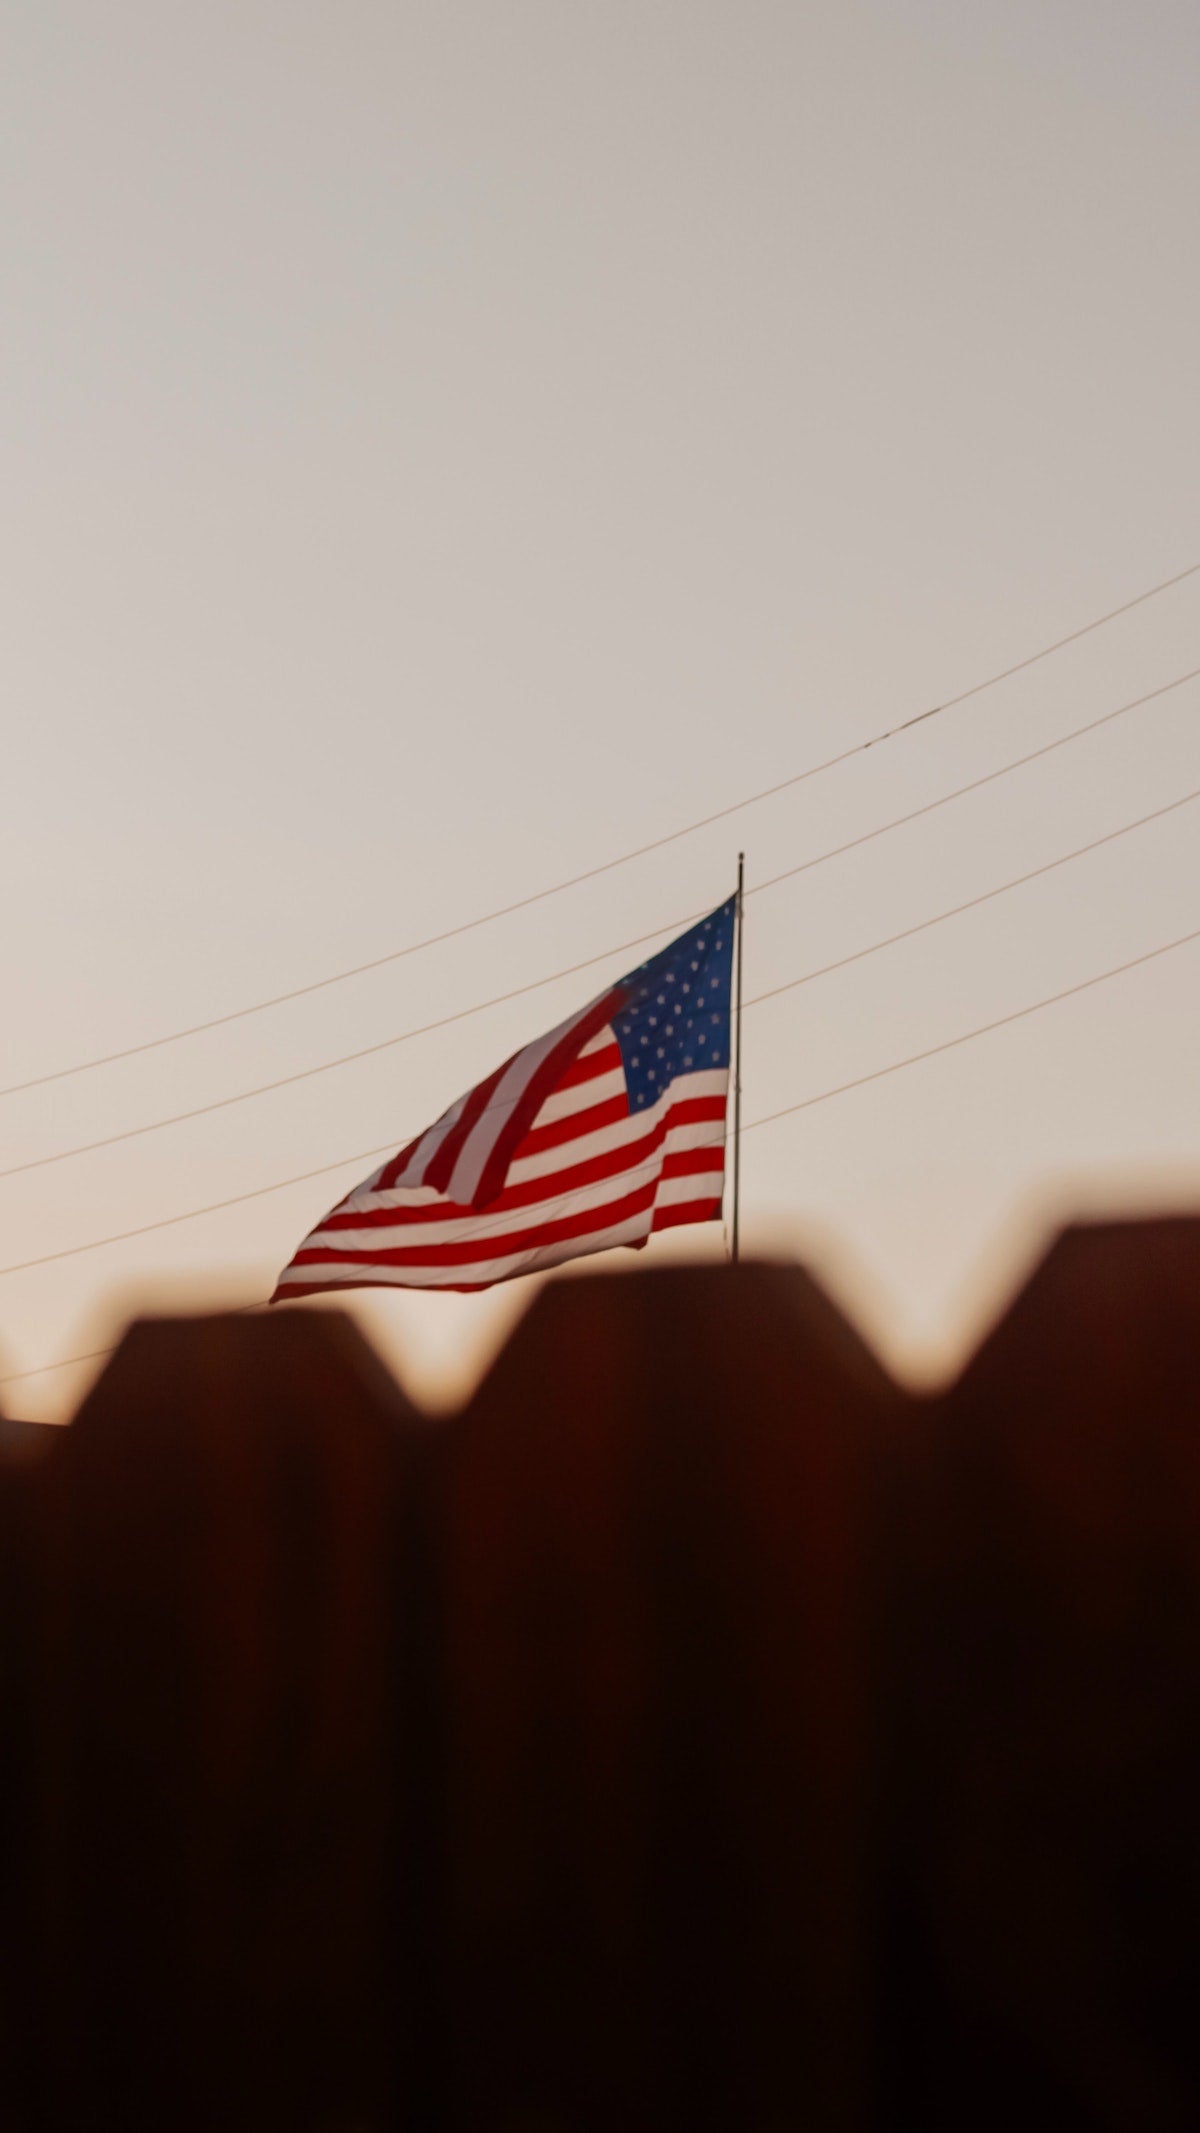 A photo of the American flag displayed just above the top of a fence in the foreground